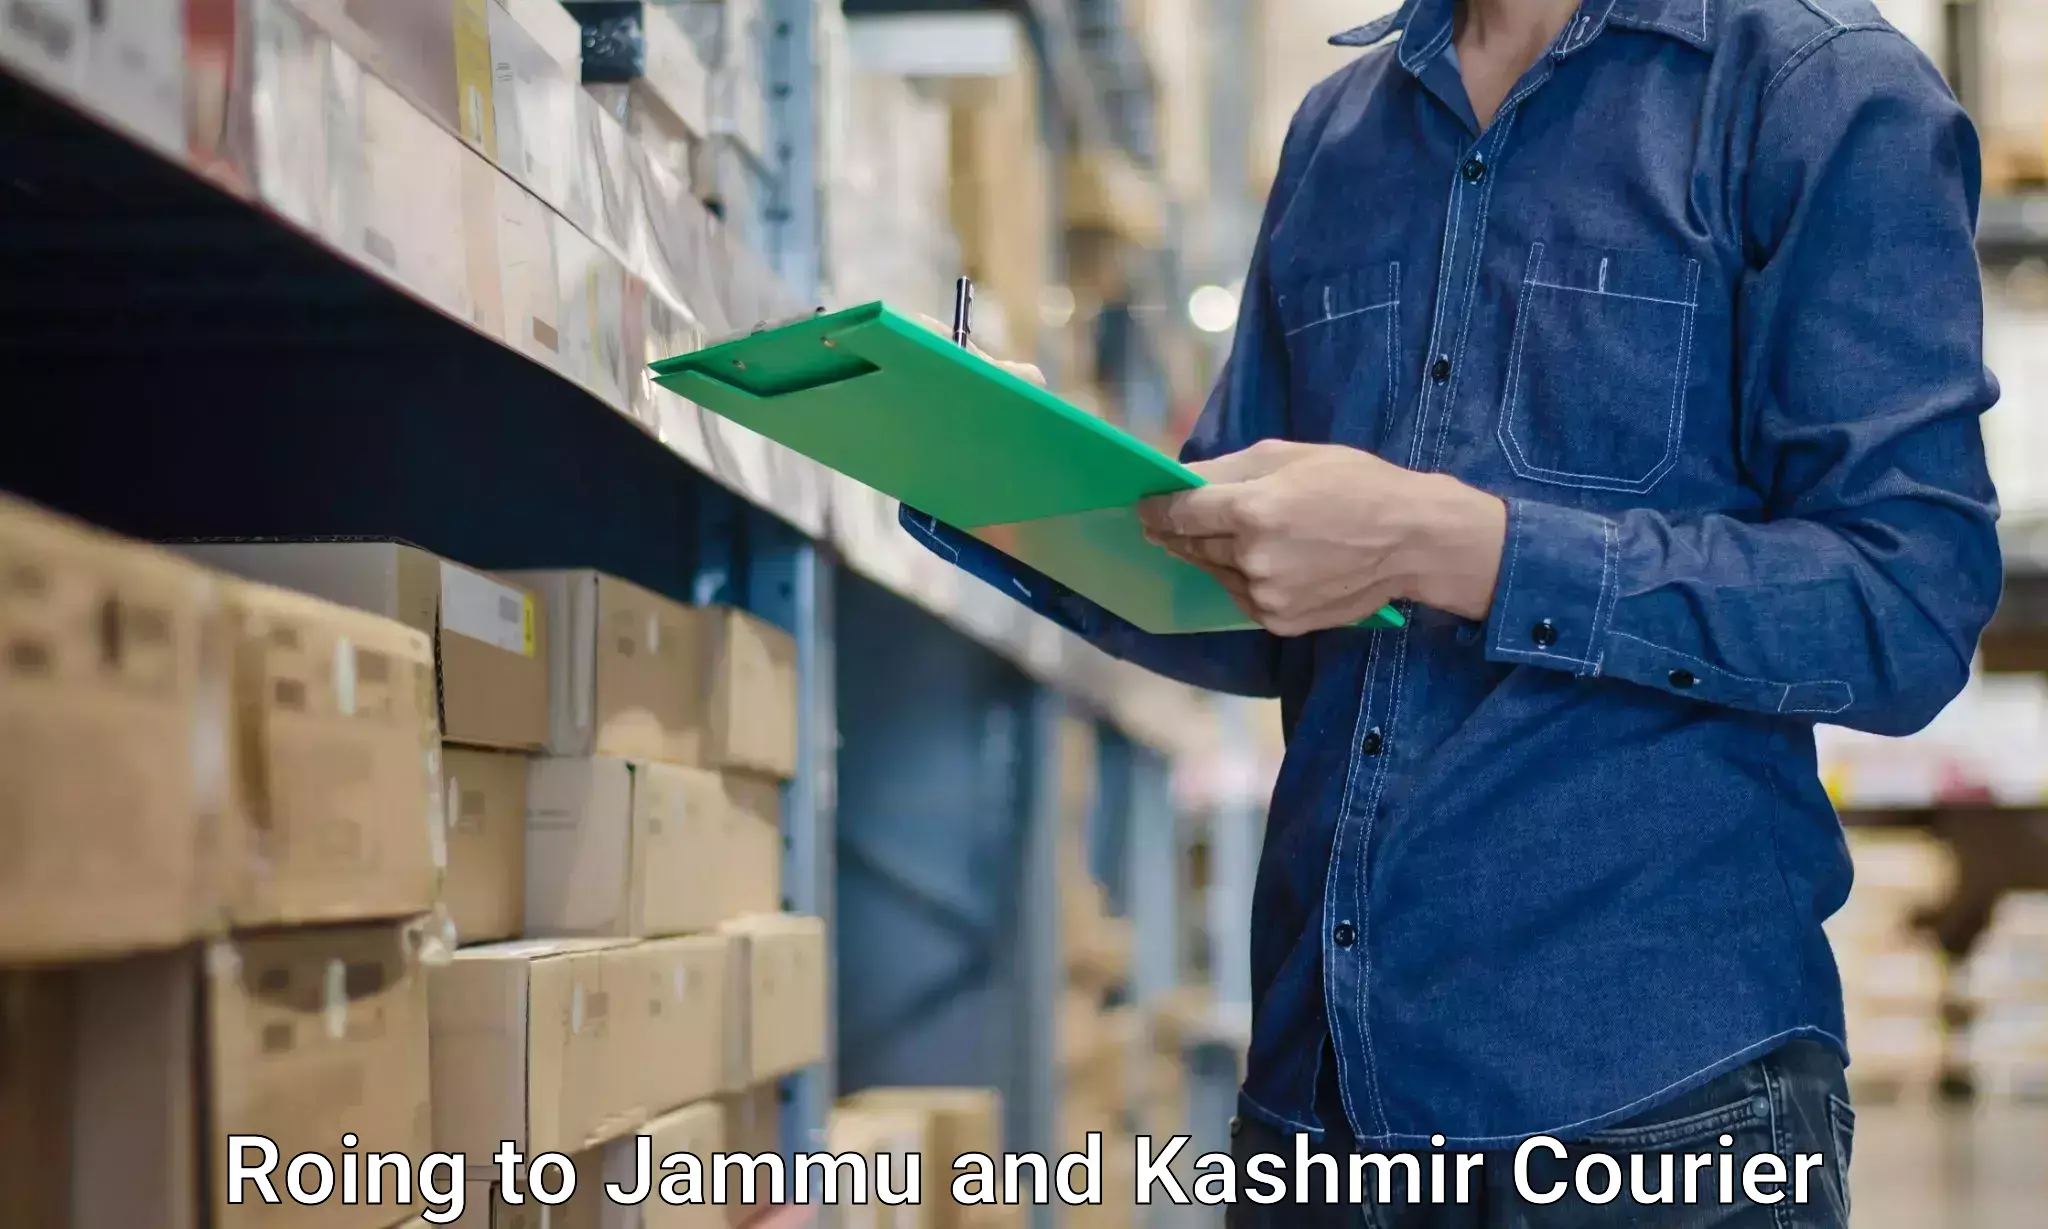 Home moving specialists Roing to Jammu and Kashmir